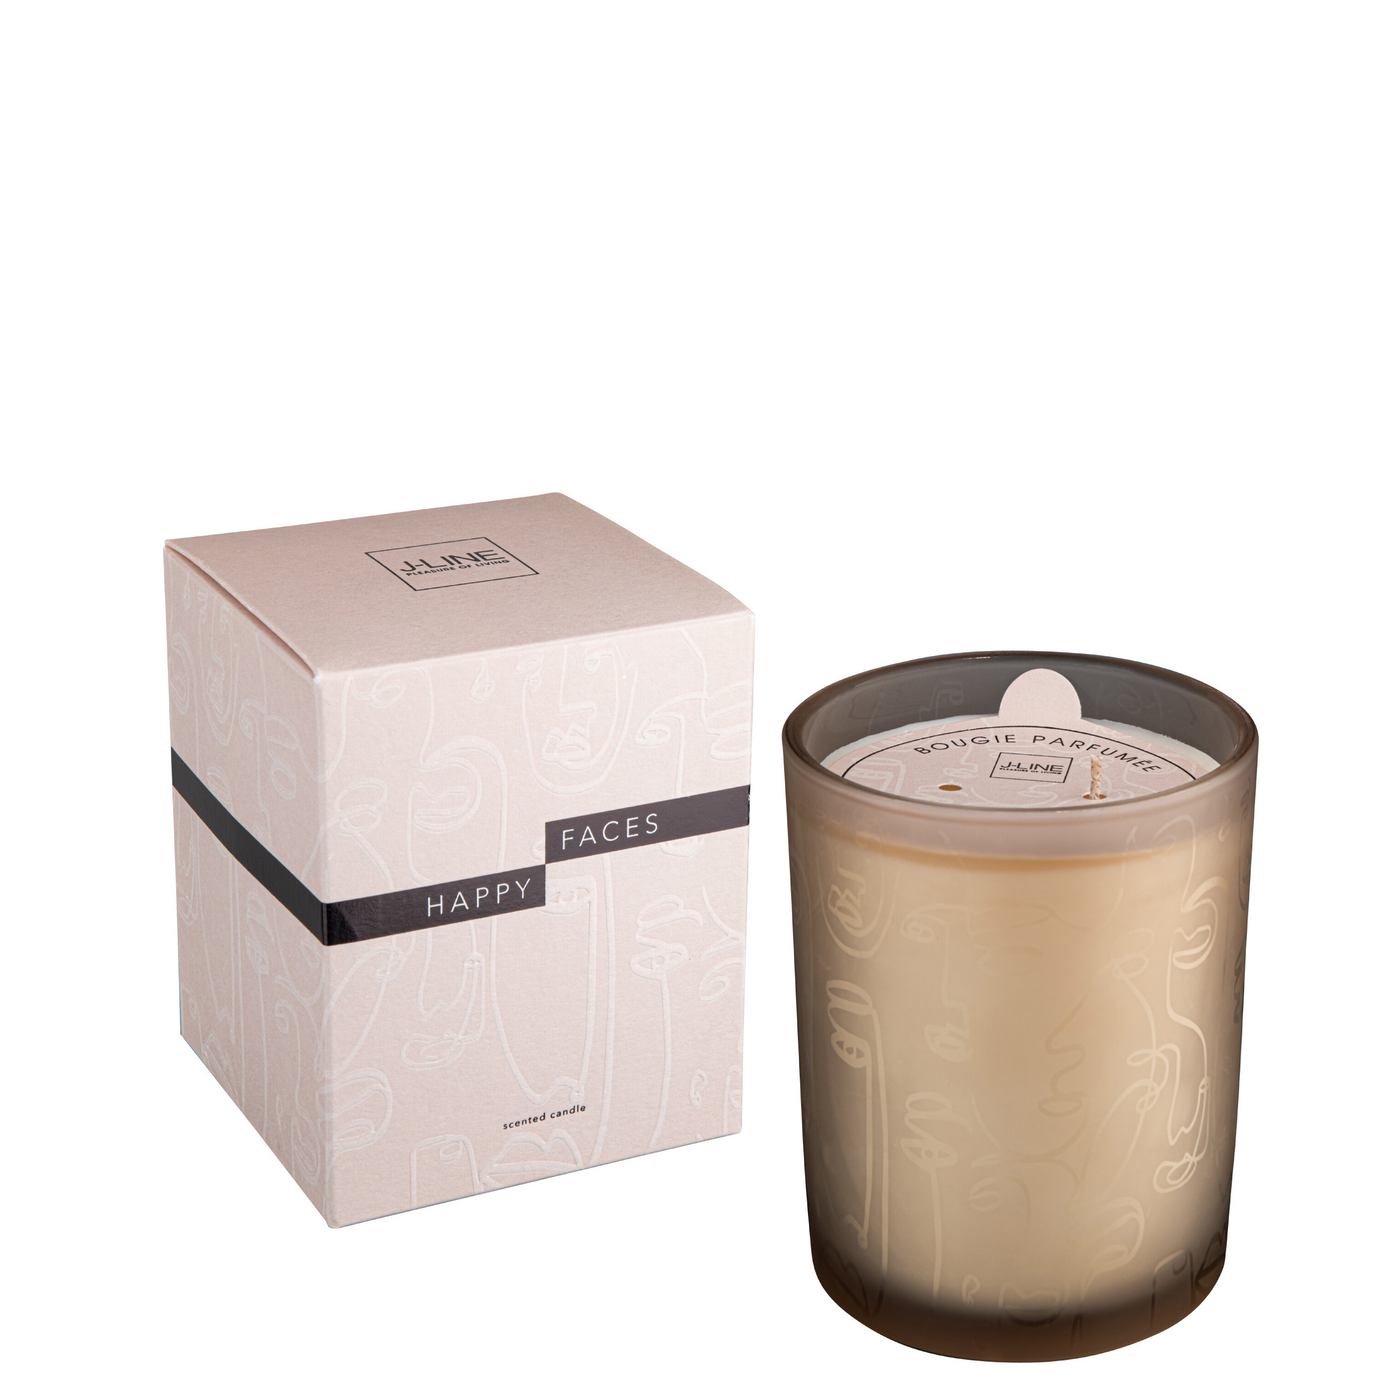 SCENTED CANDLE HAPPY FACES BEIGE LARGE-70U